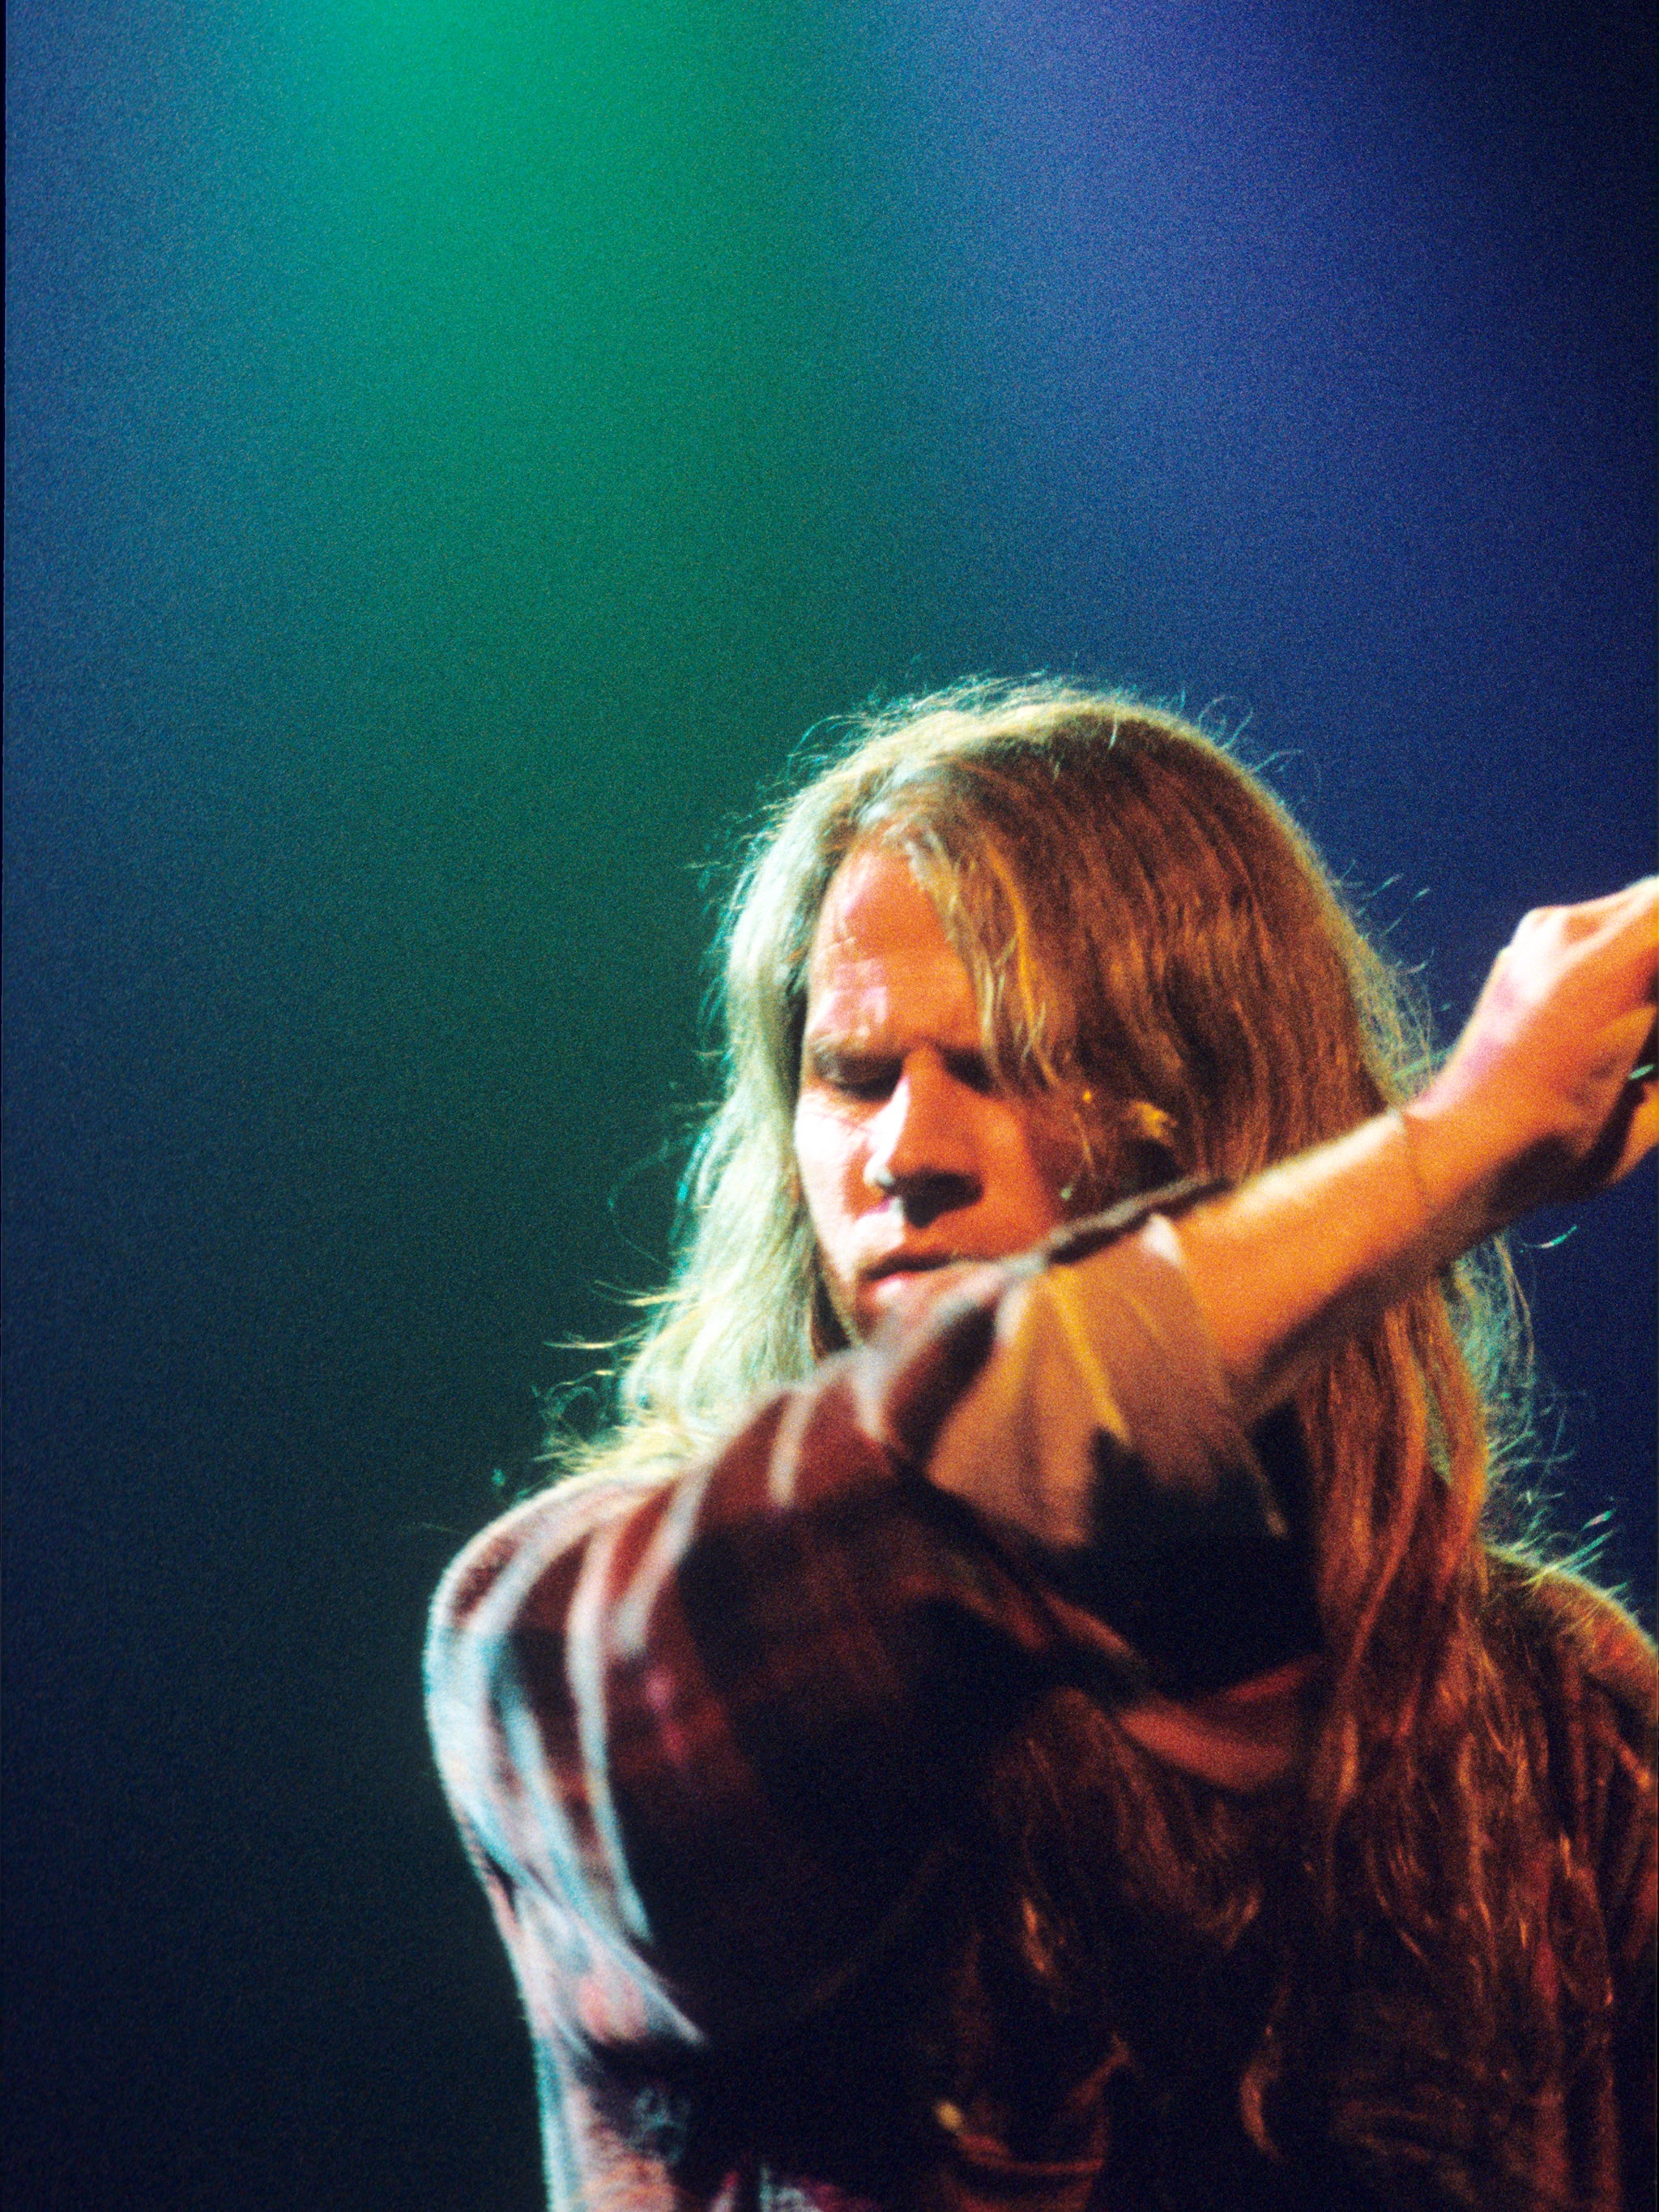 On stage with Screaming Trees in 1993